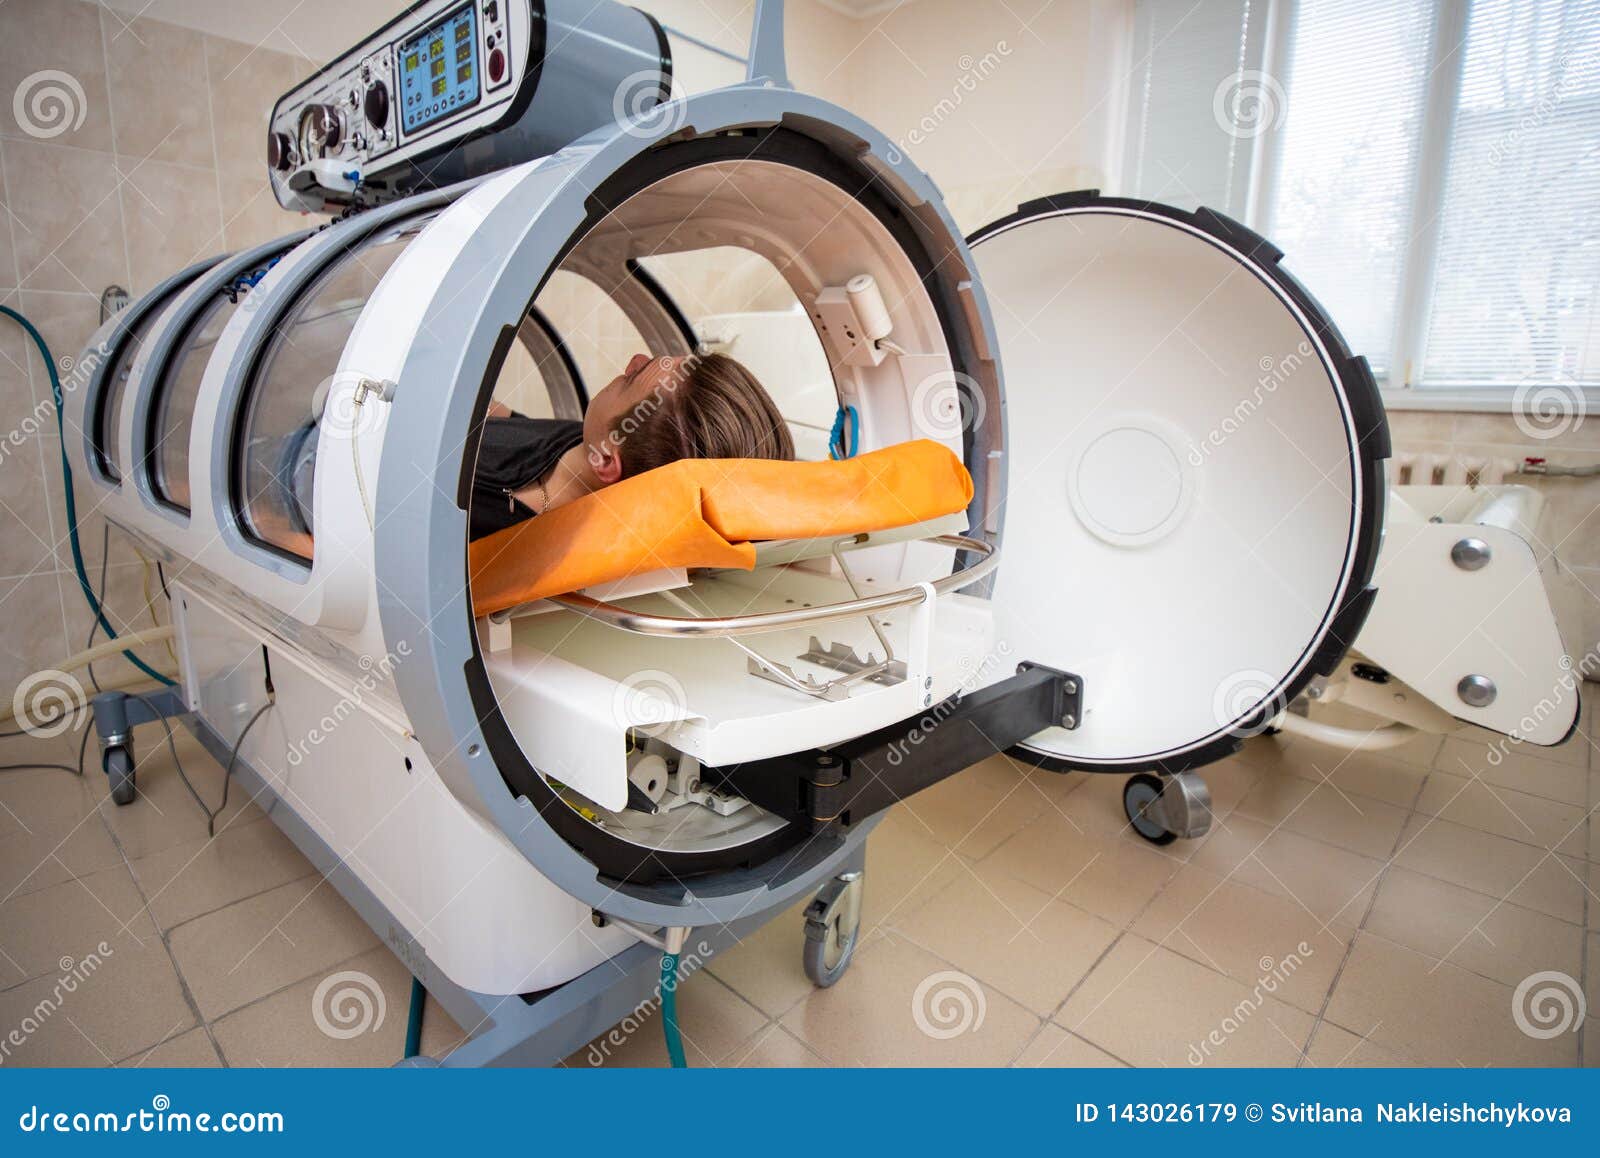 young guy in a hyperbaric chamber, oxygen treatment